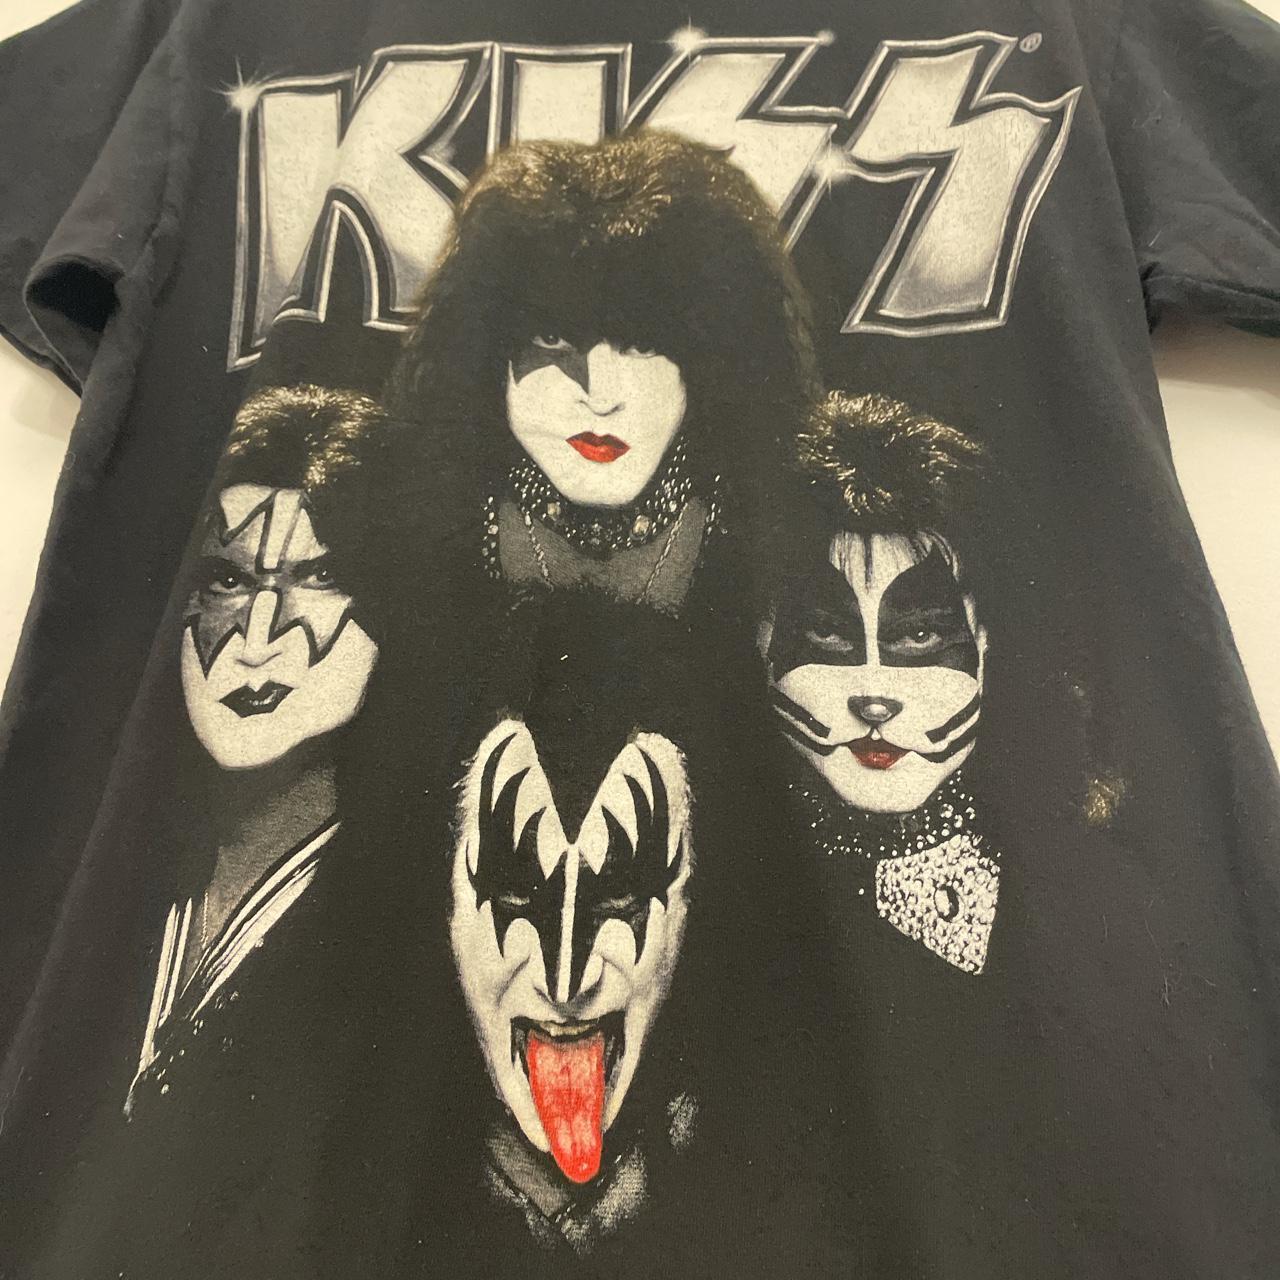 Product Image 2 - Kiss I Was There tee
Crazy